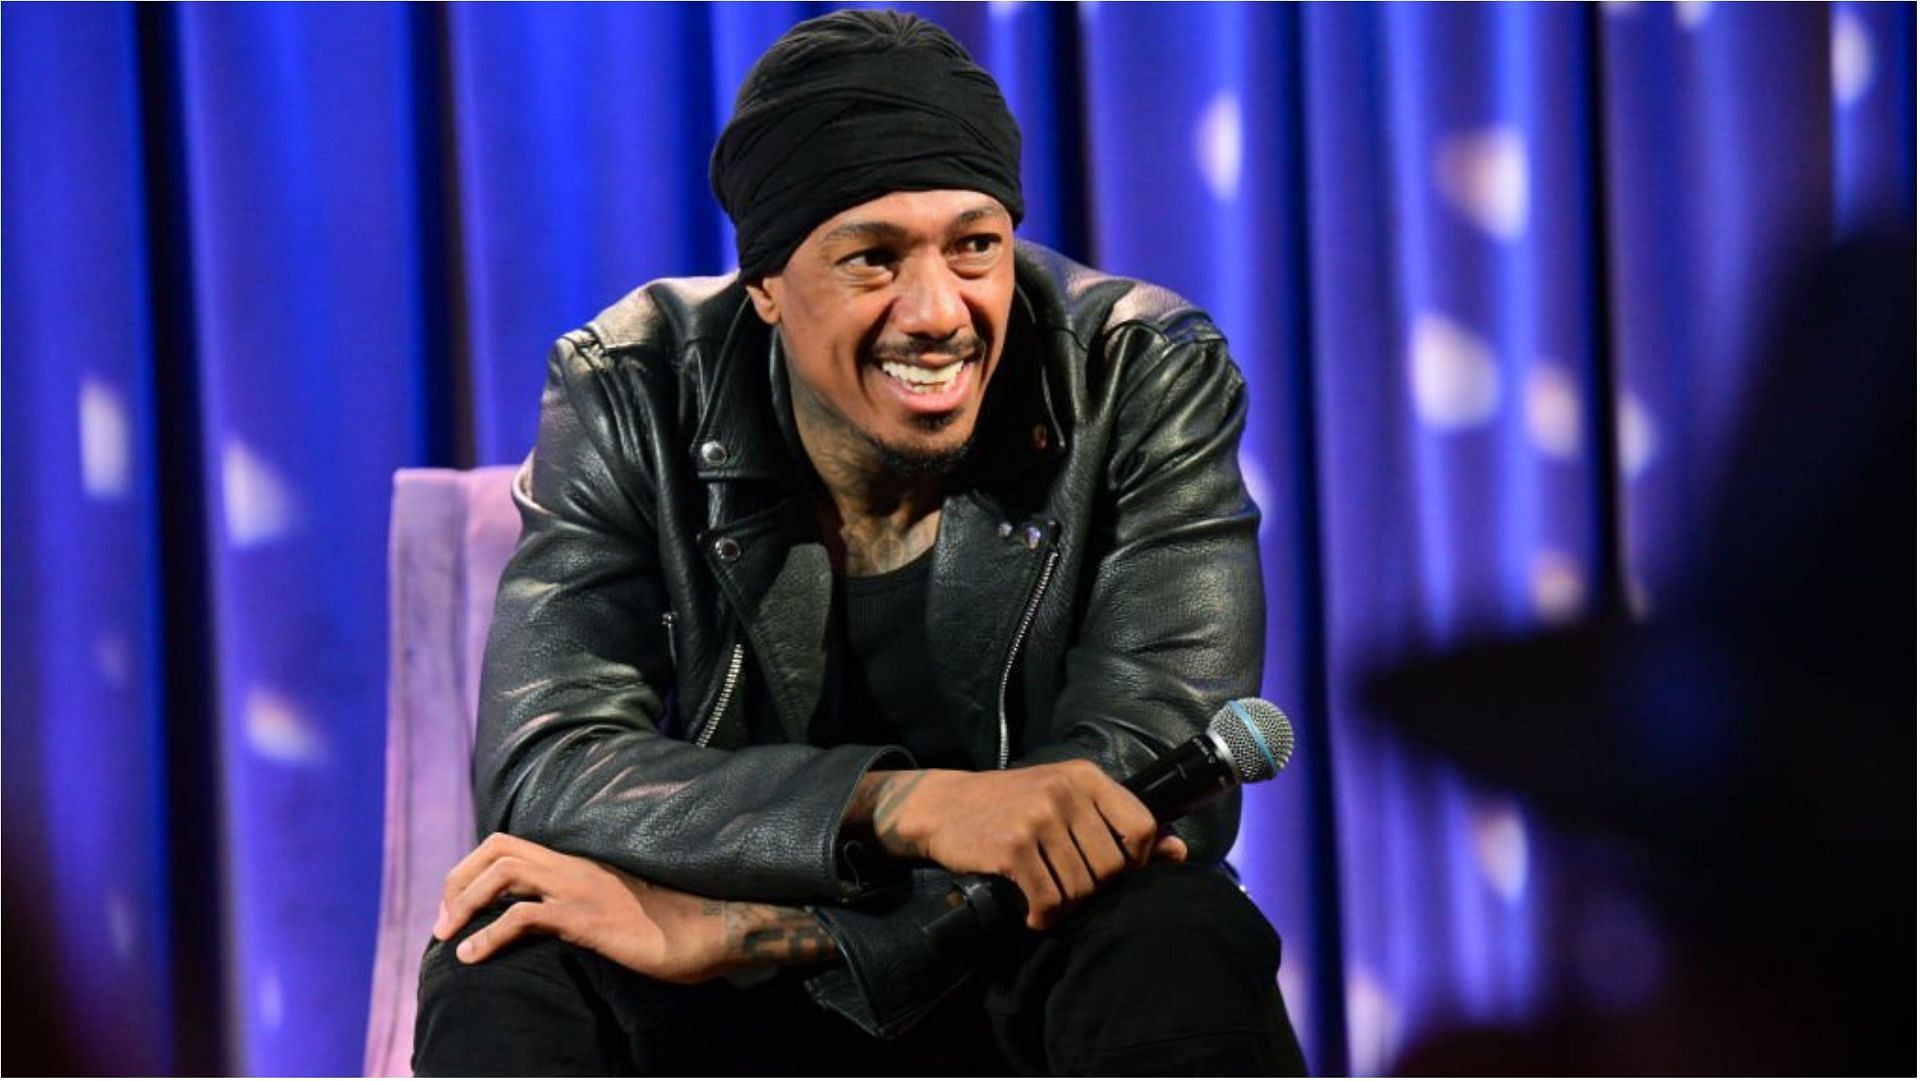 Nick Cannon has been suffering from other health issues in the past (Image via Prince Williams/Getty Images)